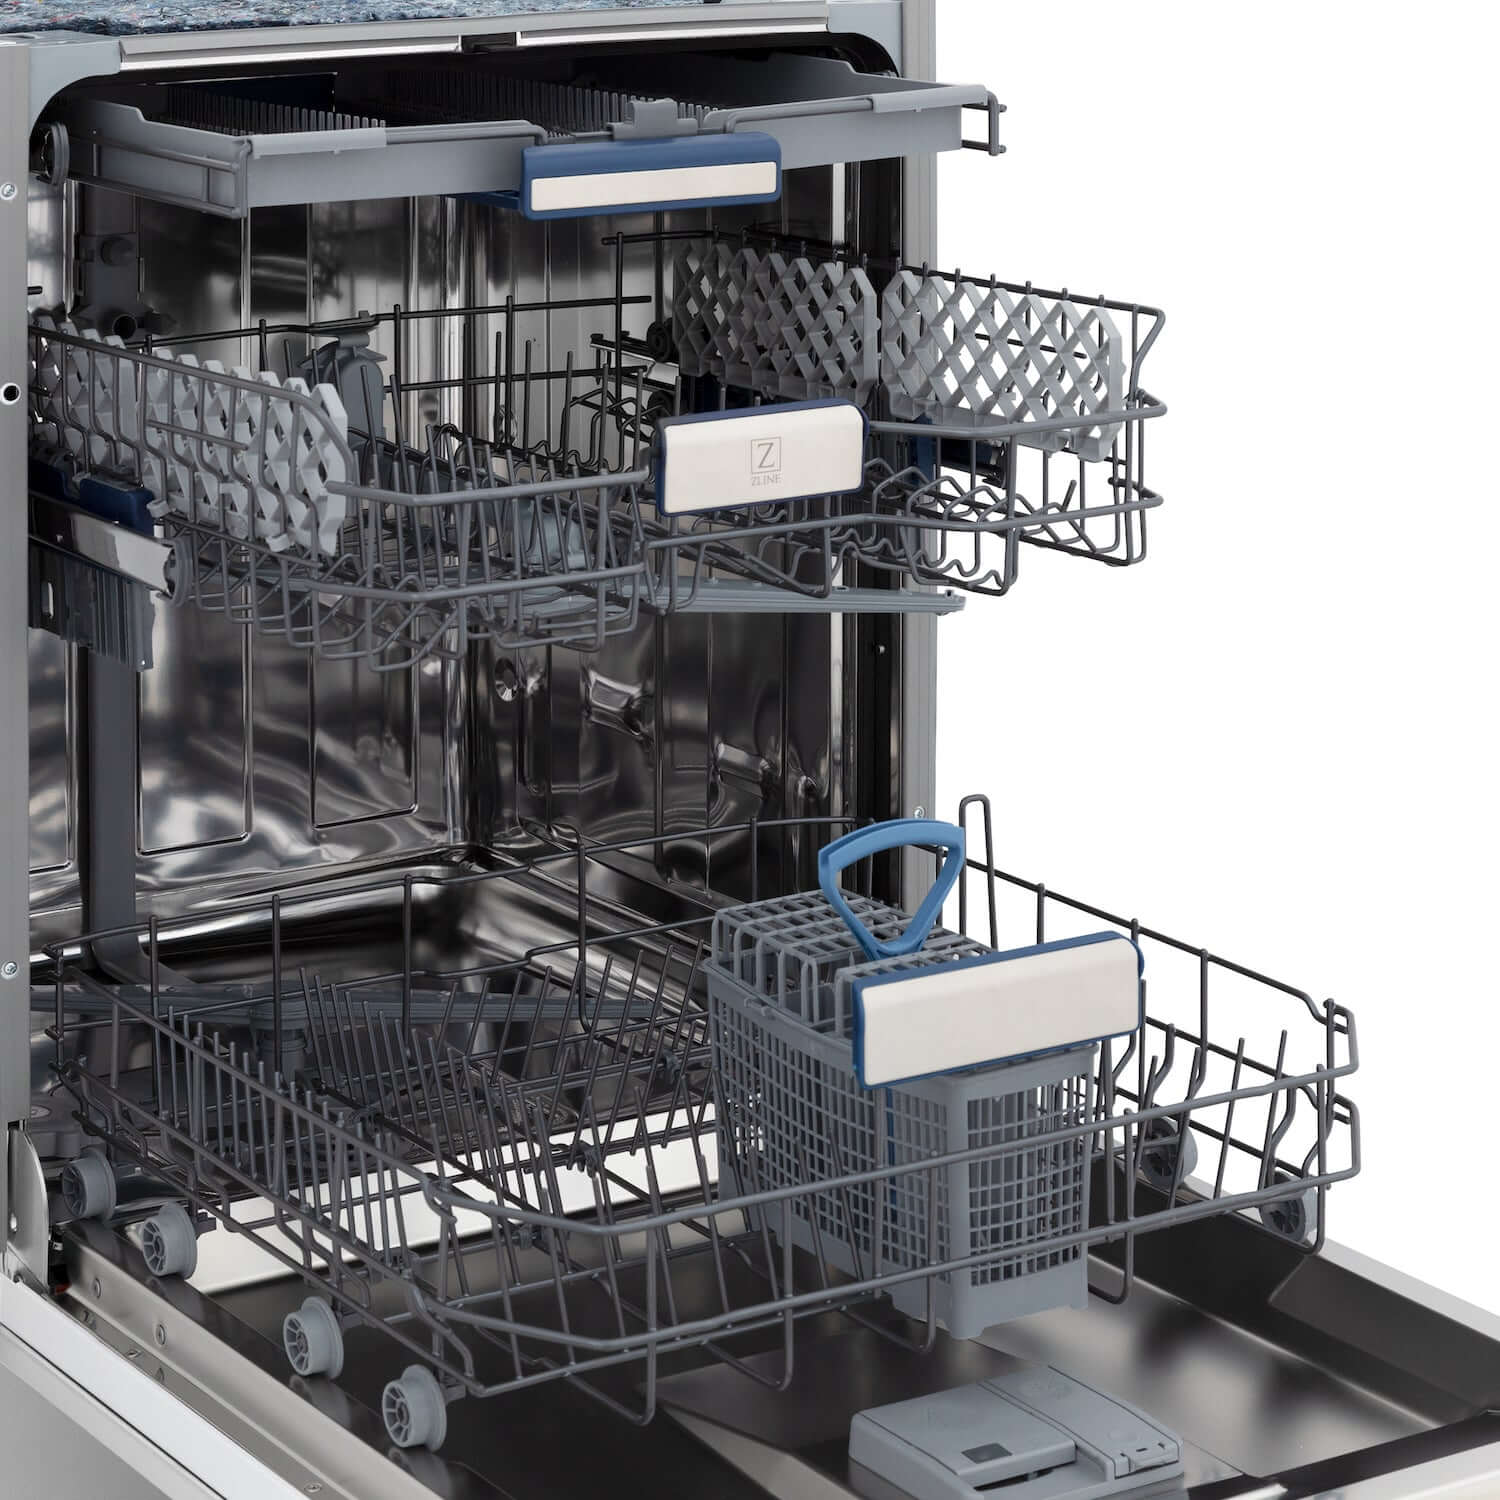 ZLINE 24" Stainless Steel Dishwasher with door open and three racks inside tub.